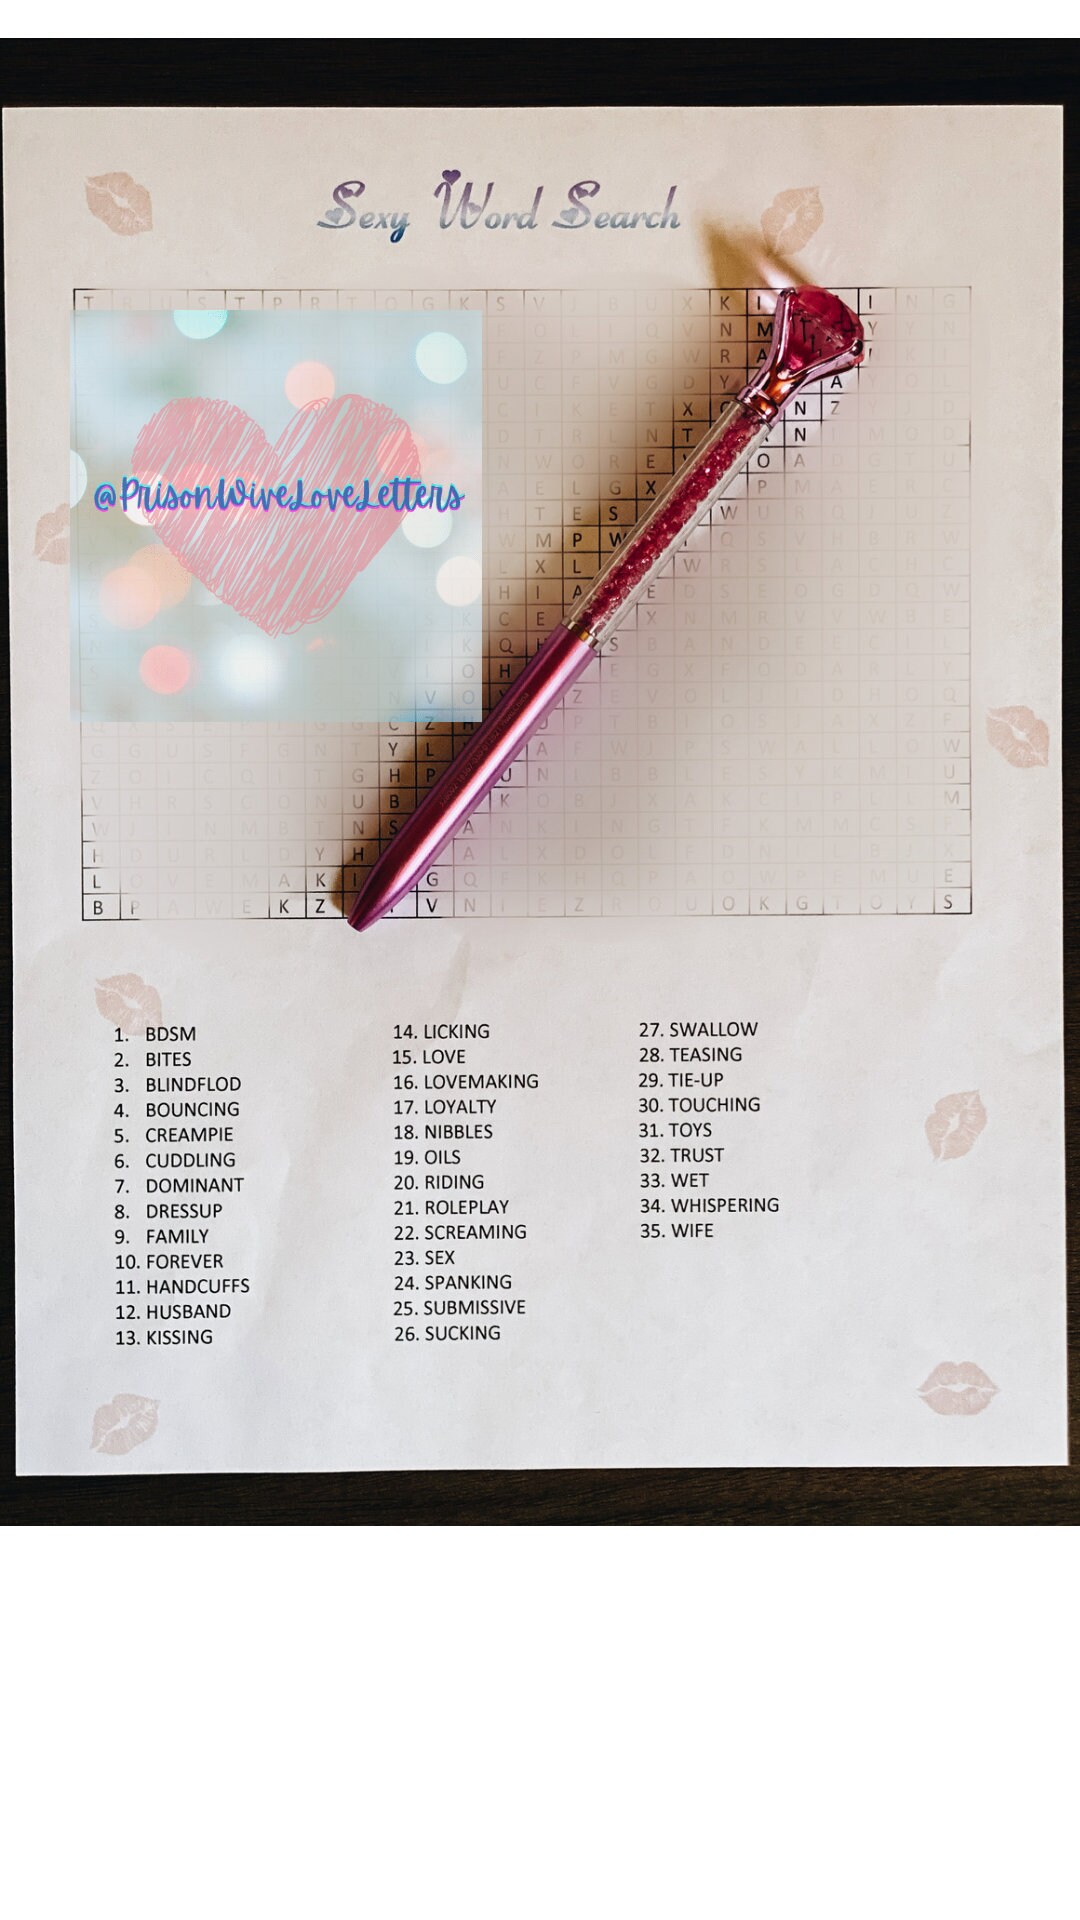 Prison Wife Games Fun Personalized Stationary Love Wife photo